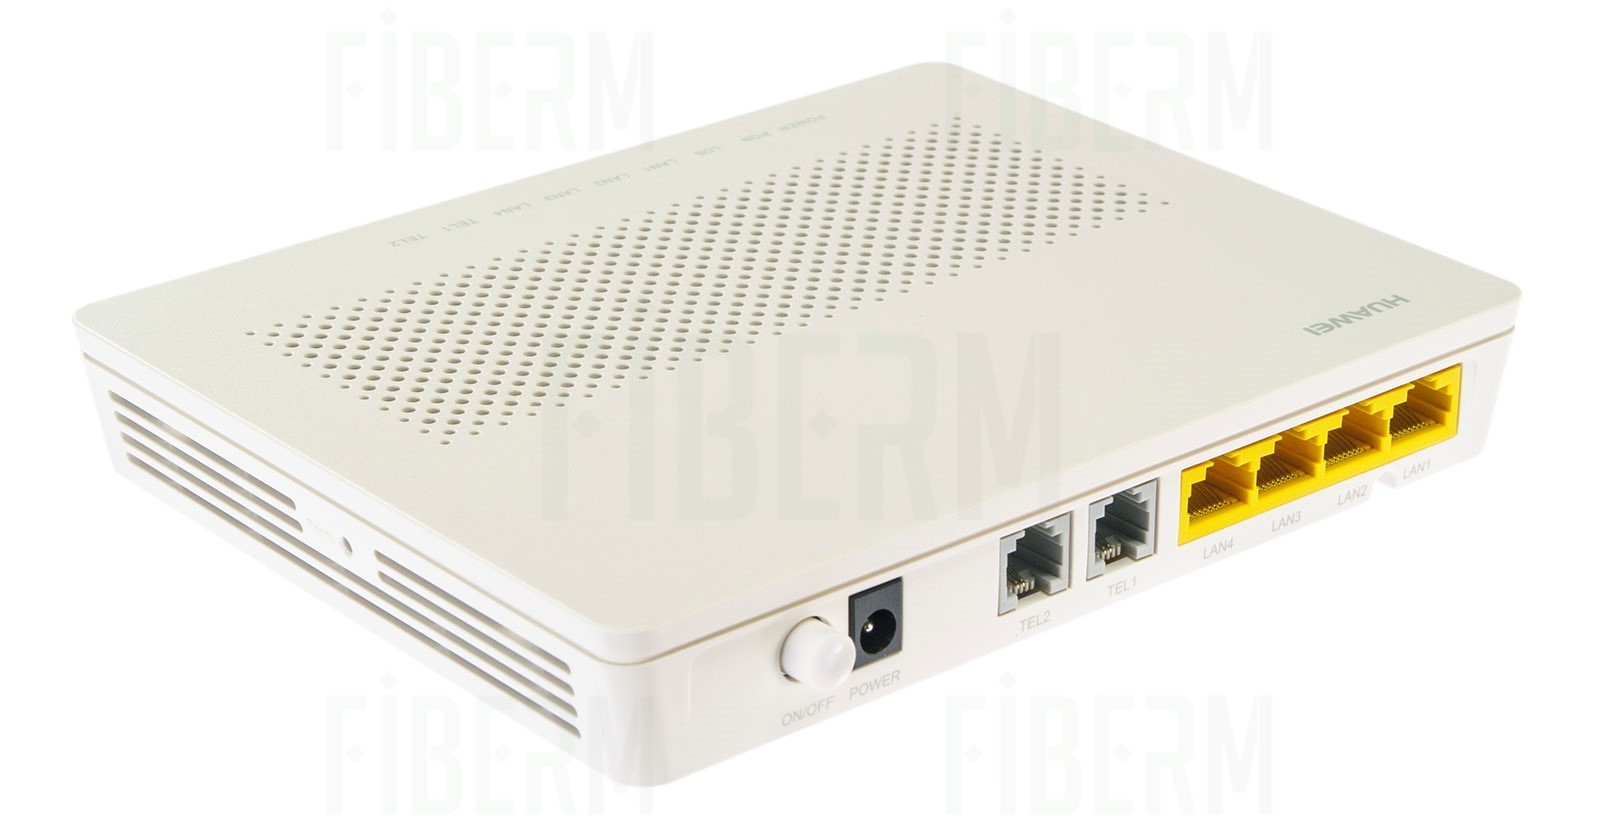 Huawei HG8240H GPON ONT 4xGE, 2x POTS - software router